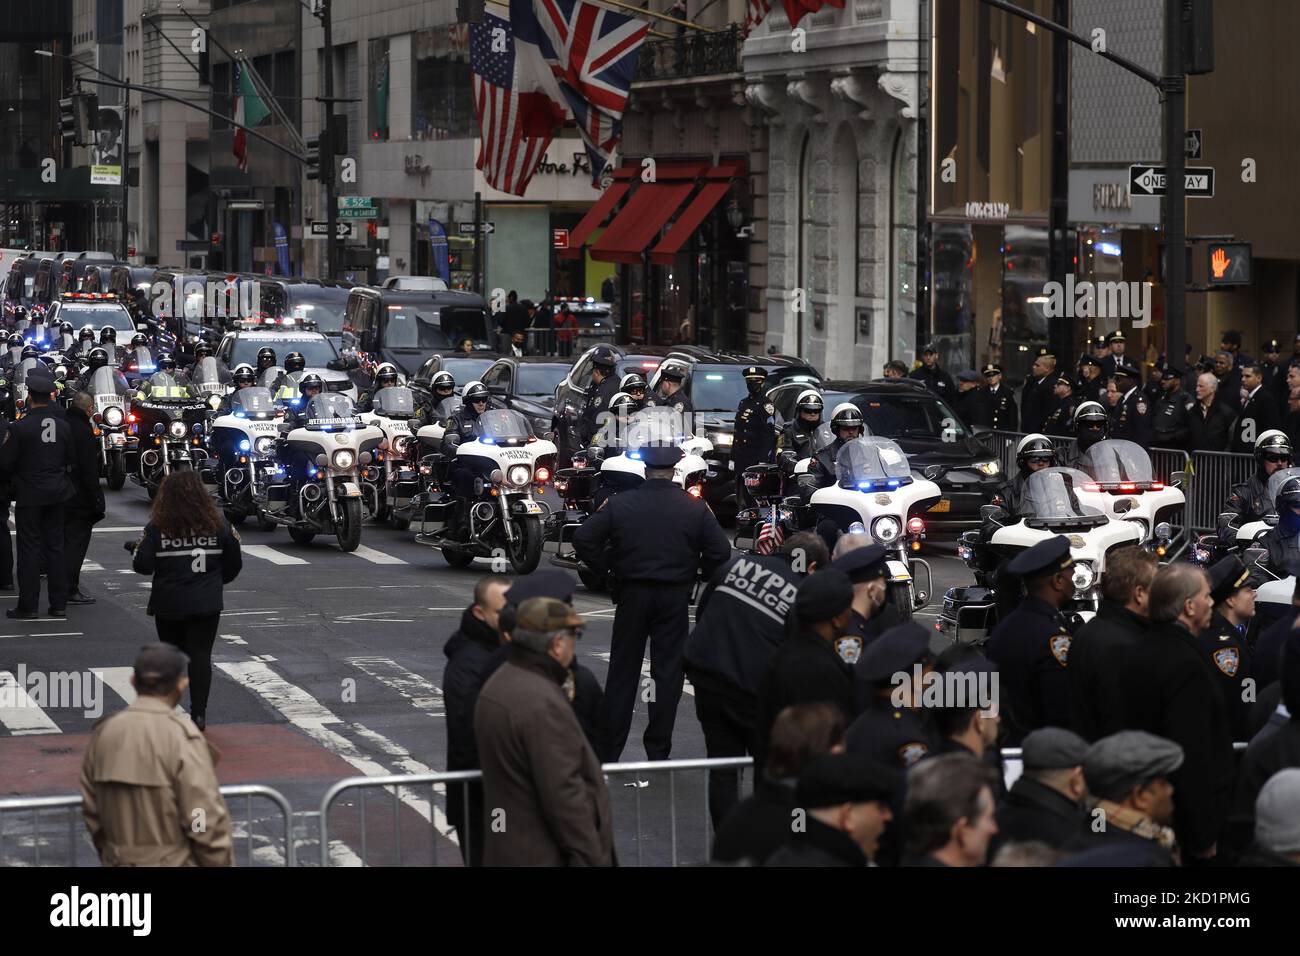 Hundredths of motorcycle officers start the funerary procession as thousands of police officers from various jurisdictions around the country attend the funeral for the slain NYPD Officer Wilbert Mora on February 2, 2022 in New York City, USA. The young officer was killed along with his partner Jason Rivera over week ago while responding to a domestic disturbance in Harlem. His partner Jason Rivera was laid to rest last week. (Photo by John Lamparski/NurPhoto) Stock Photo